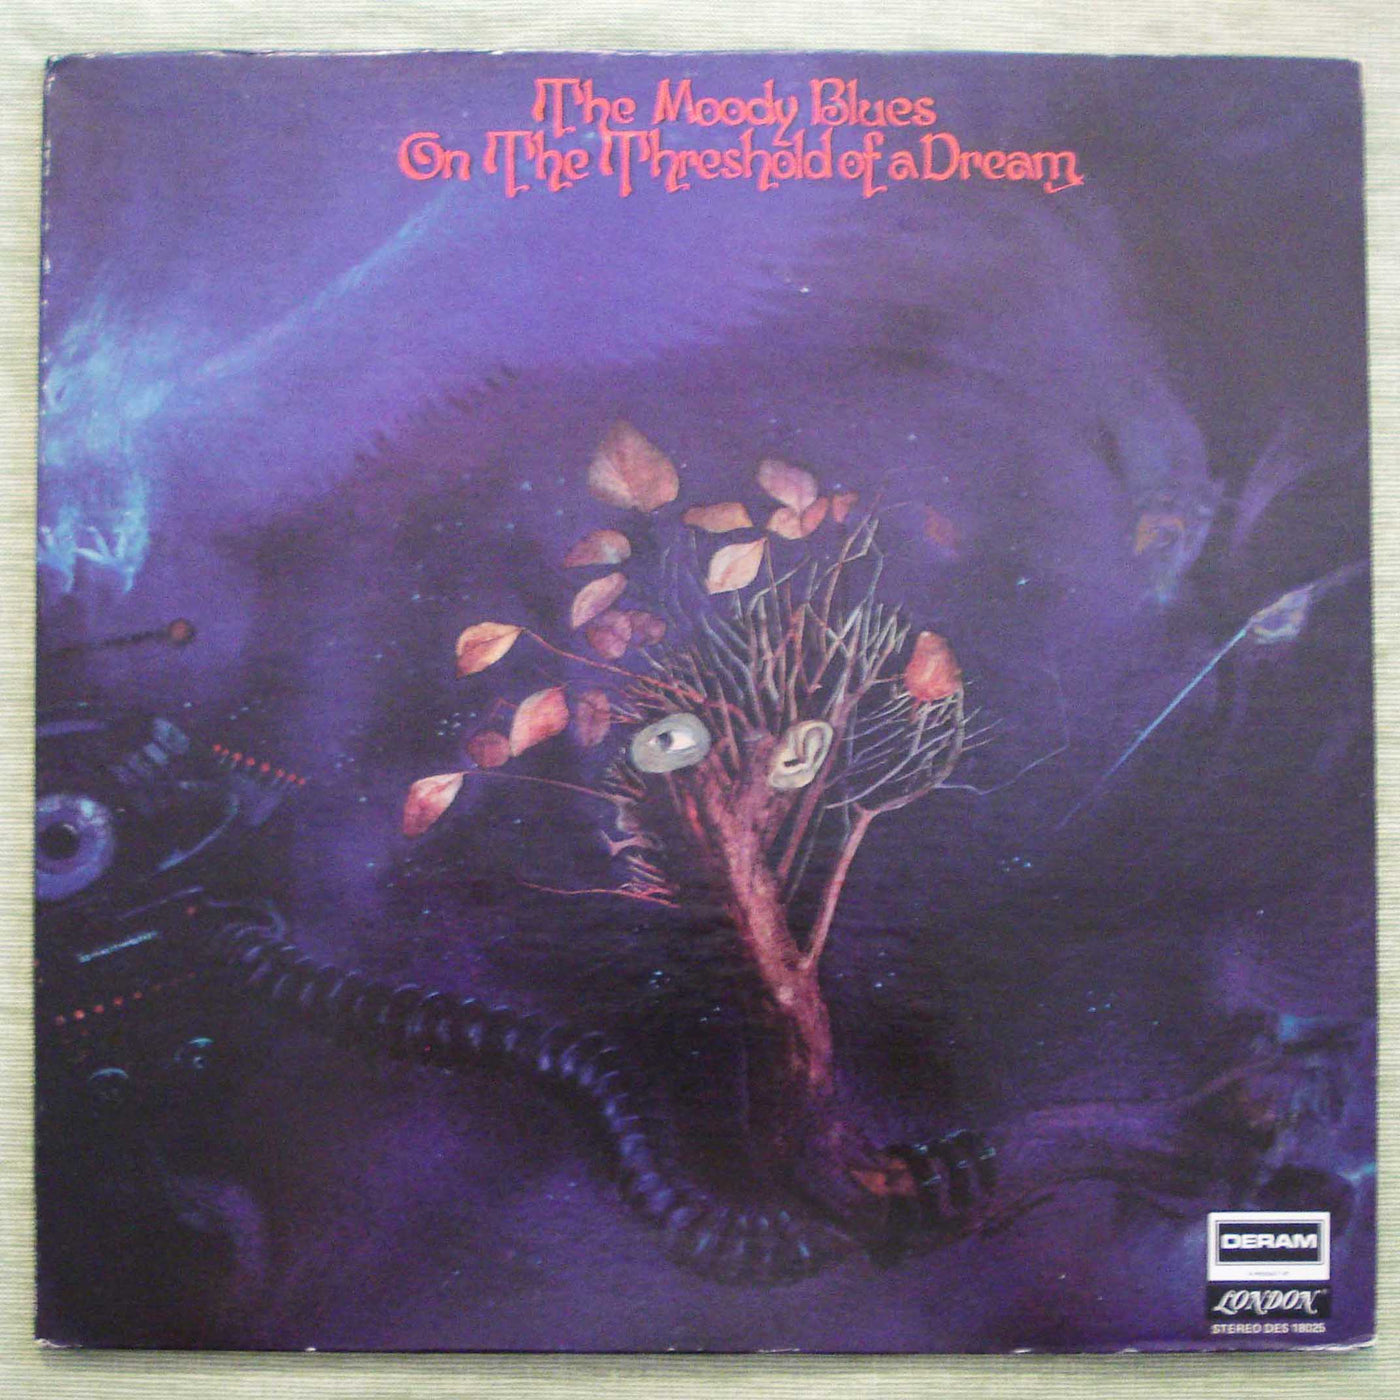 The Moody Blues - On the Threshold of a Dream (1969) Vinyl LP 33rpm DES-18025